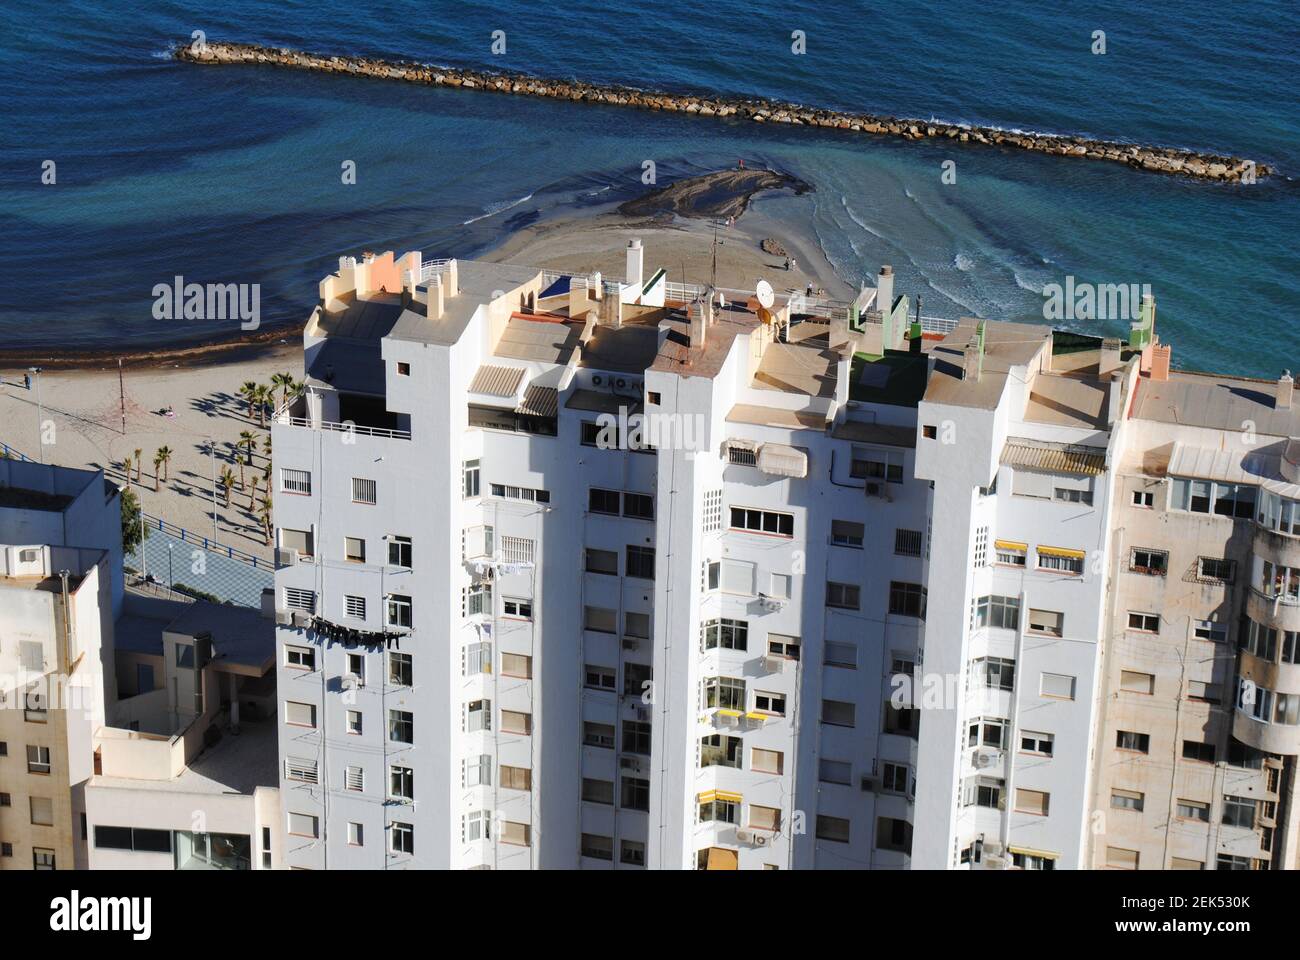 Tall blocks of flats with breathtaking views to the Mediterranean Sea. Stock Photo